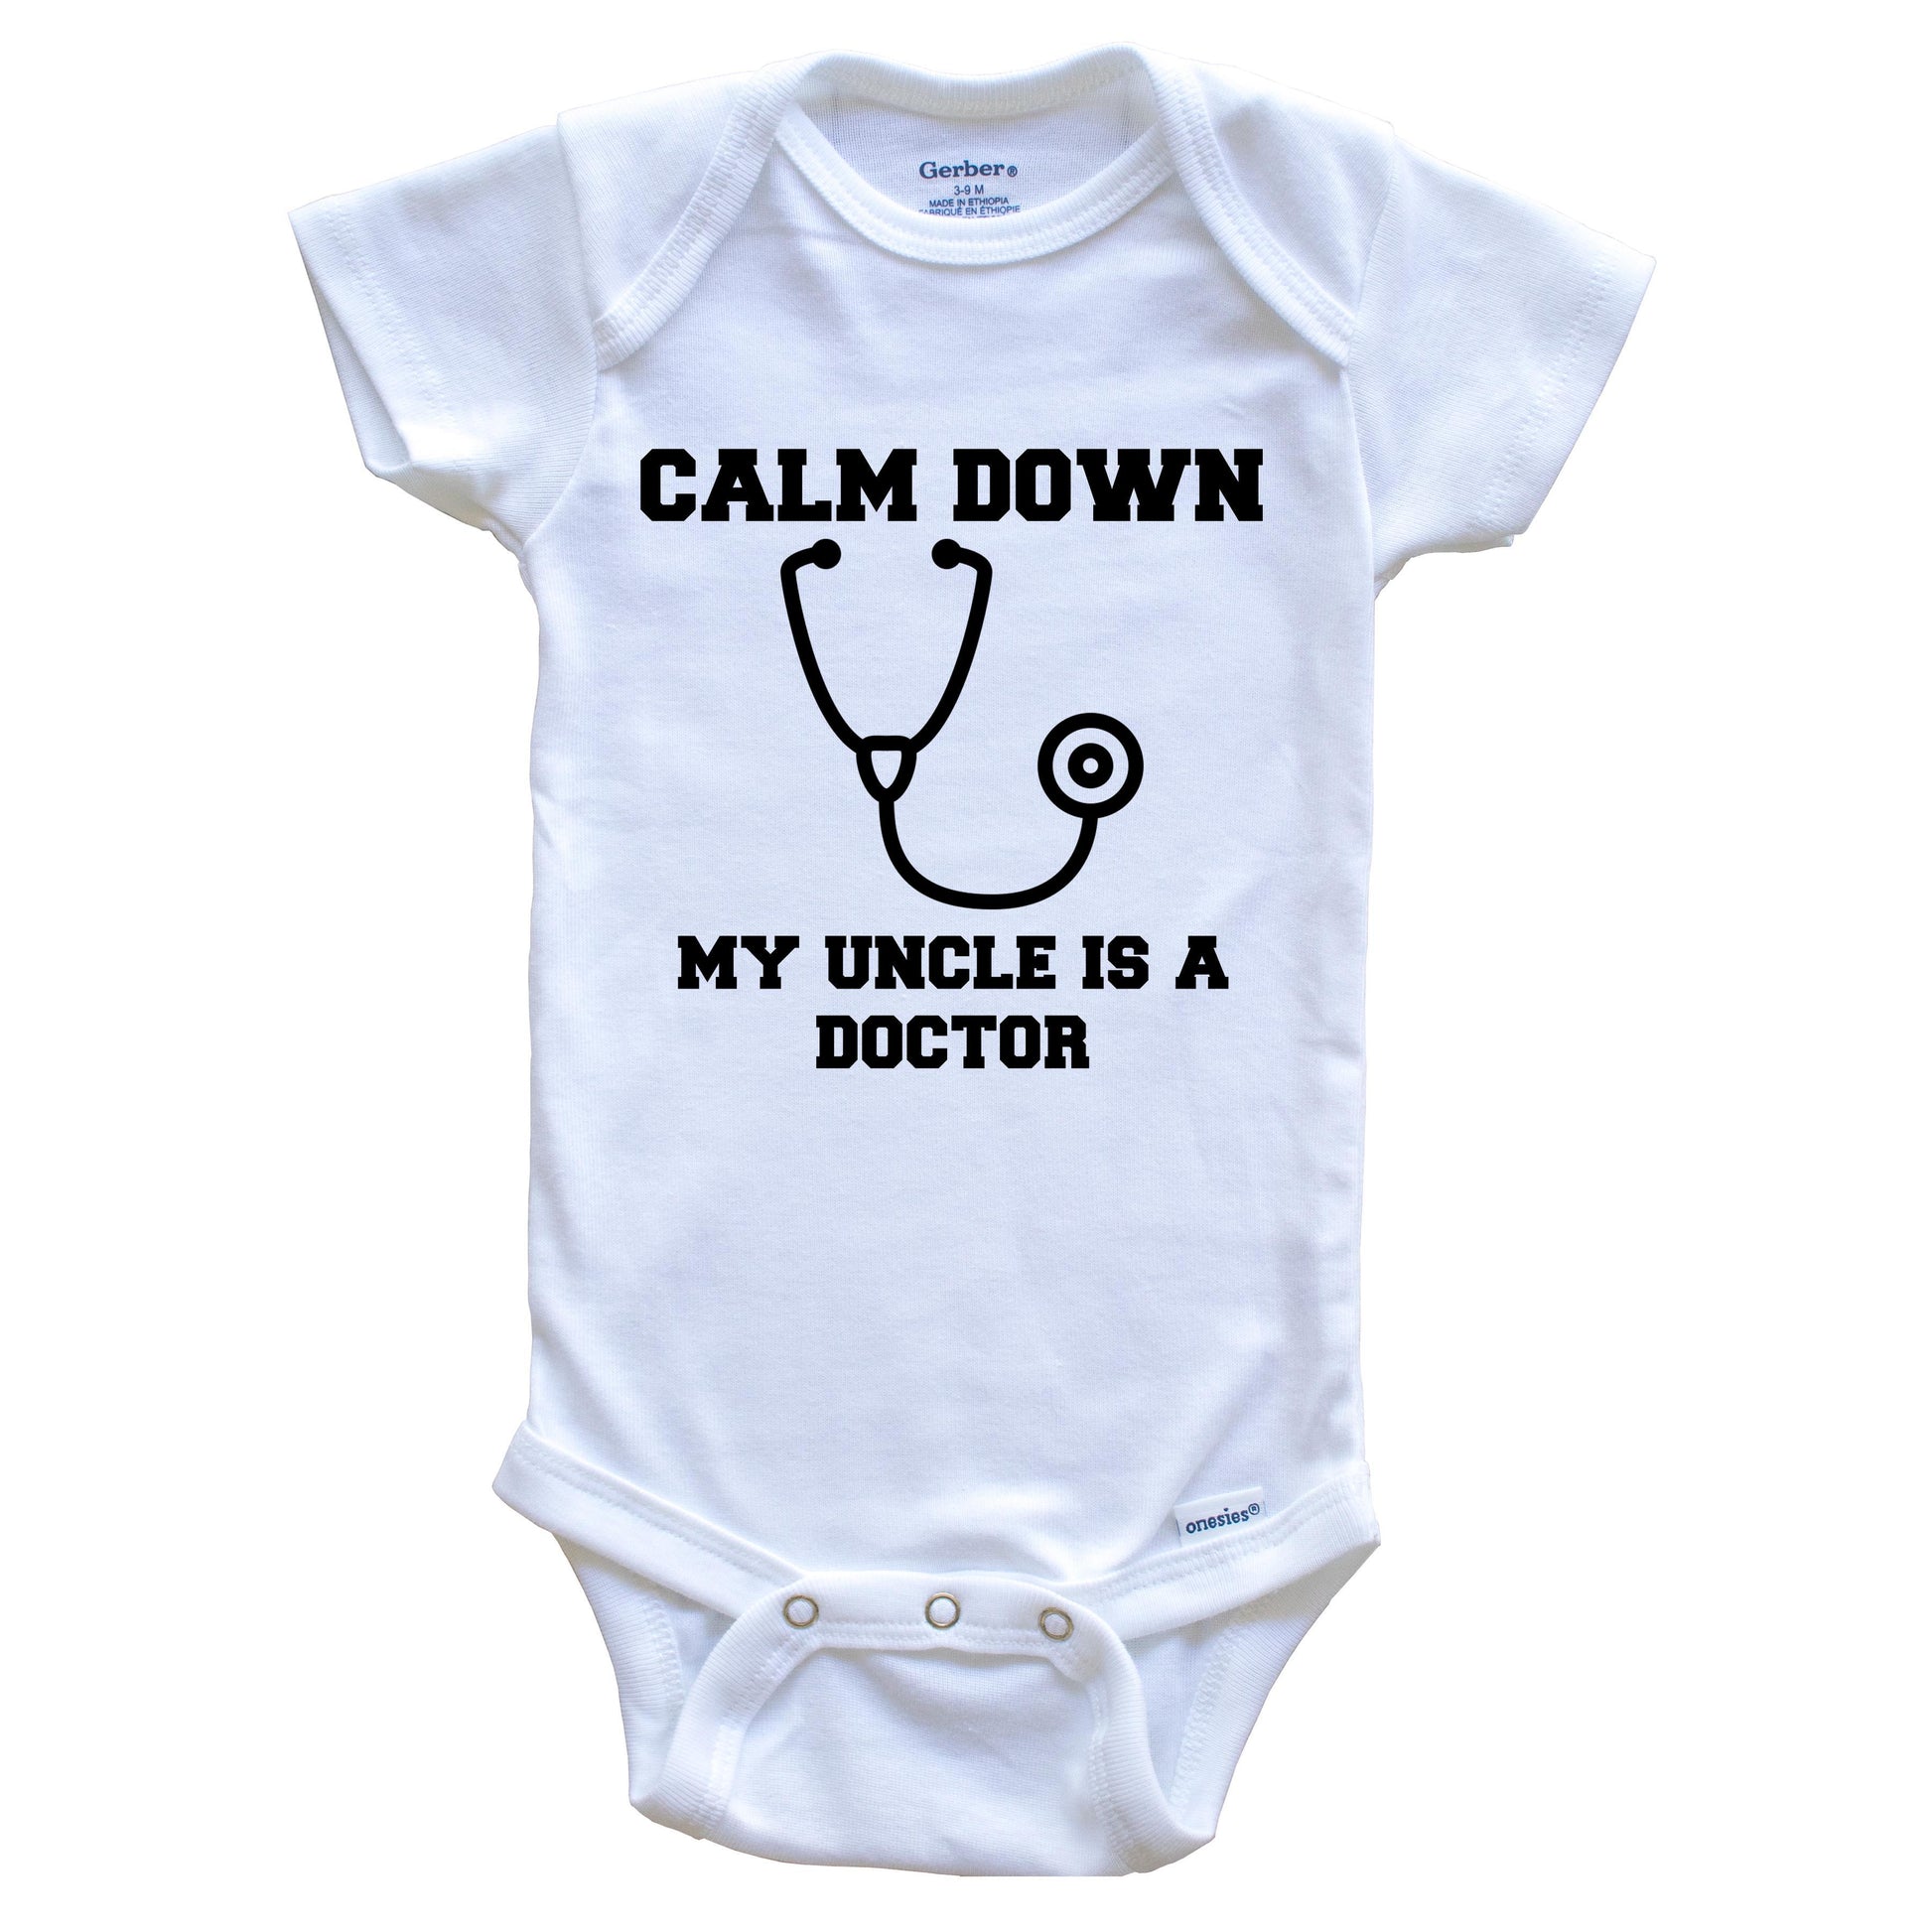 Calm Down My Uncle Is A Doctor Funny Baby Onesie - One Piece Baby Bodysuit